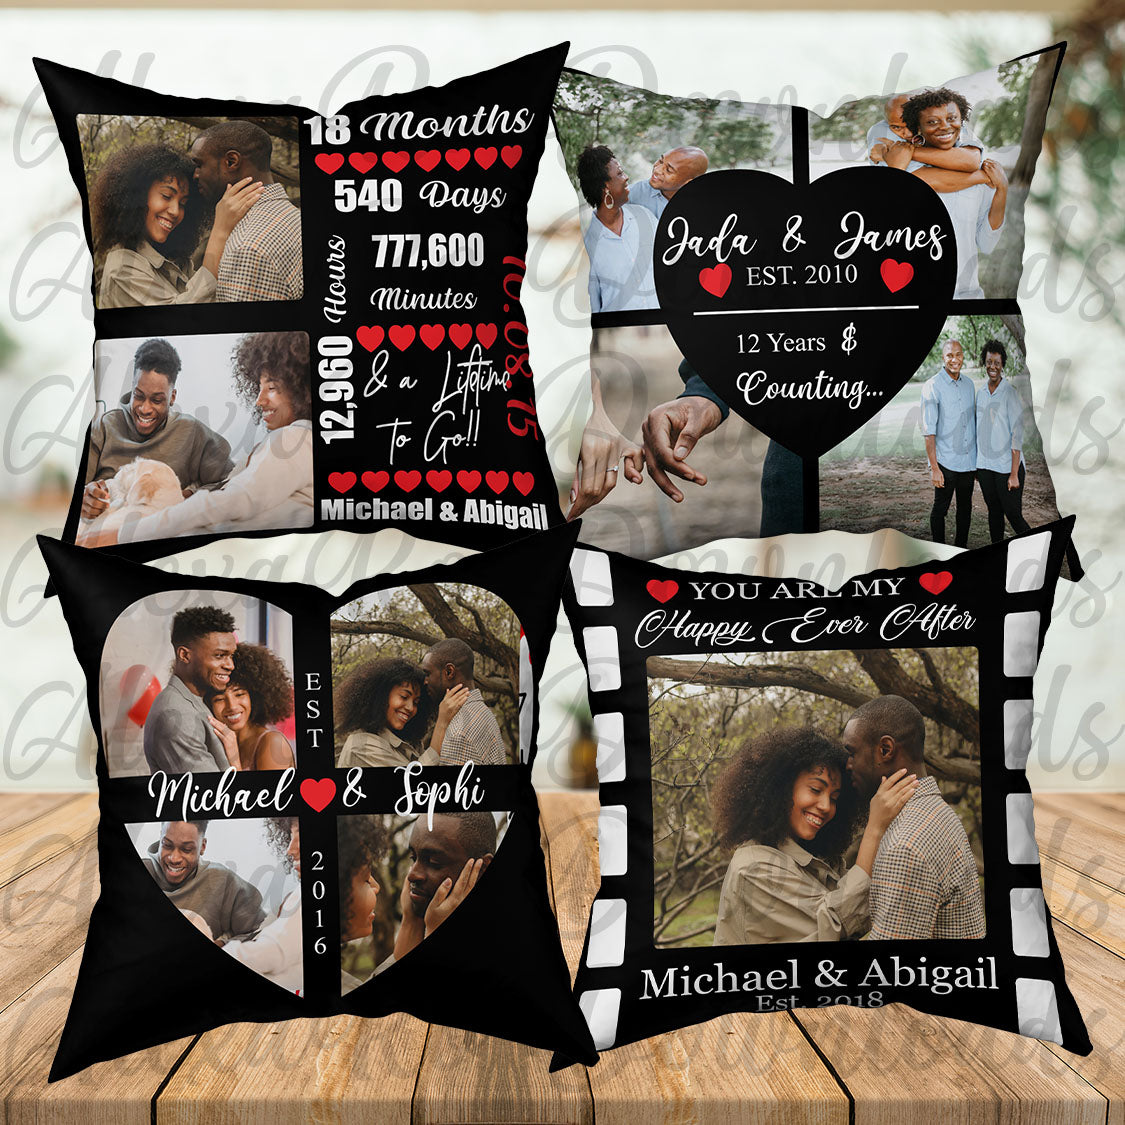 Special sublimation products for Valentine's Day.